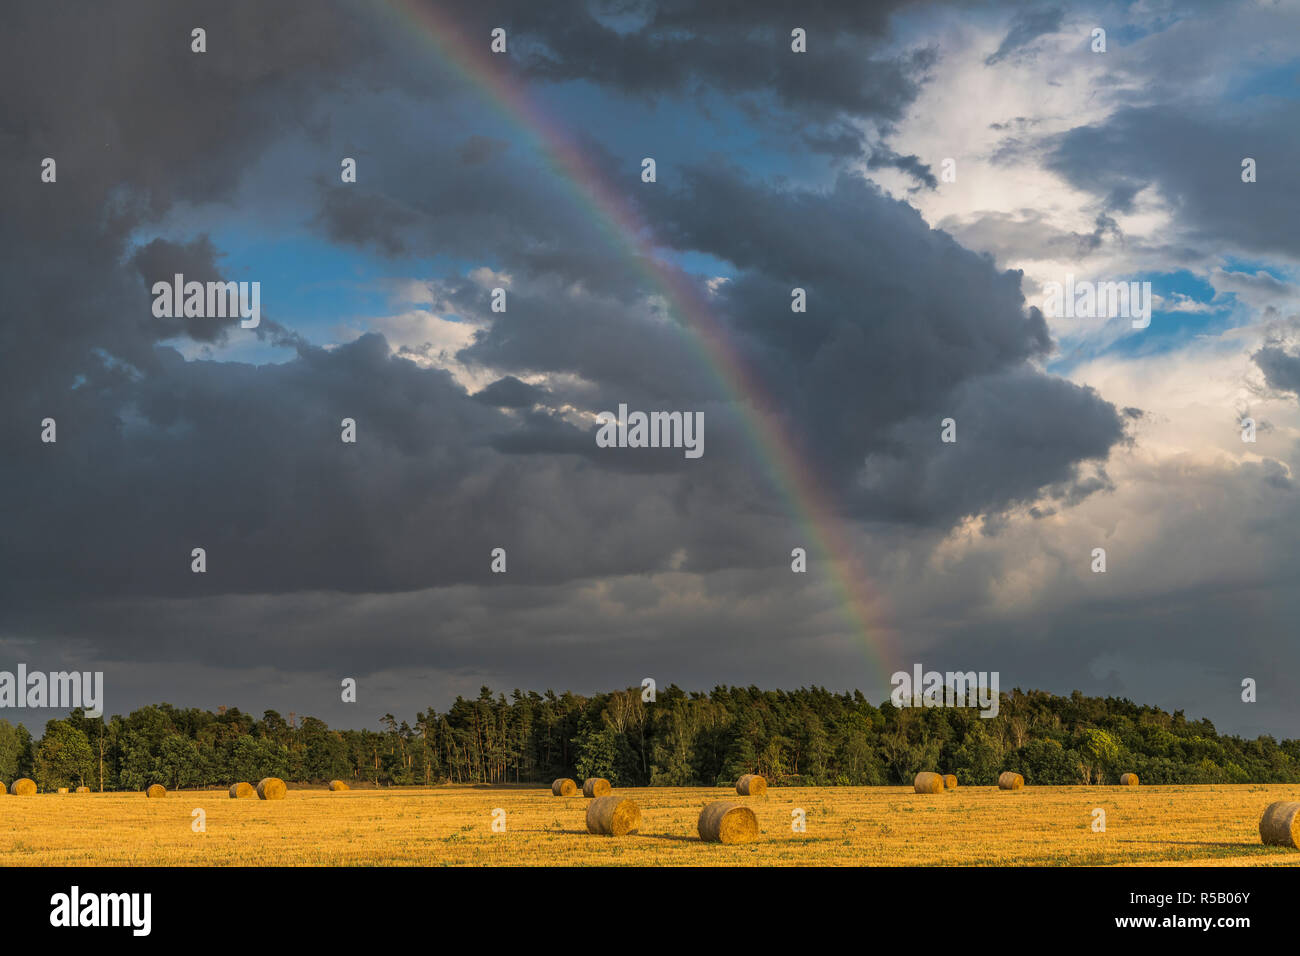 Thunderstorm with rainbow over stubble field, Thuringia, Germany Stock Photo